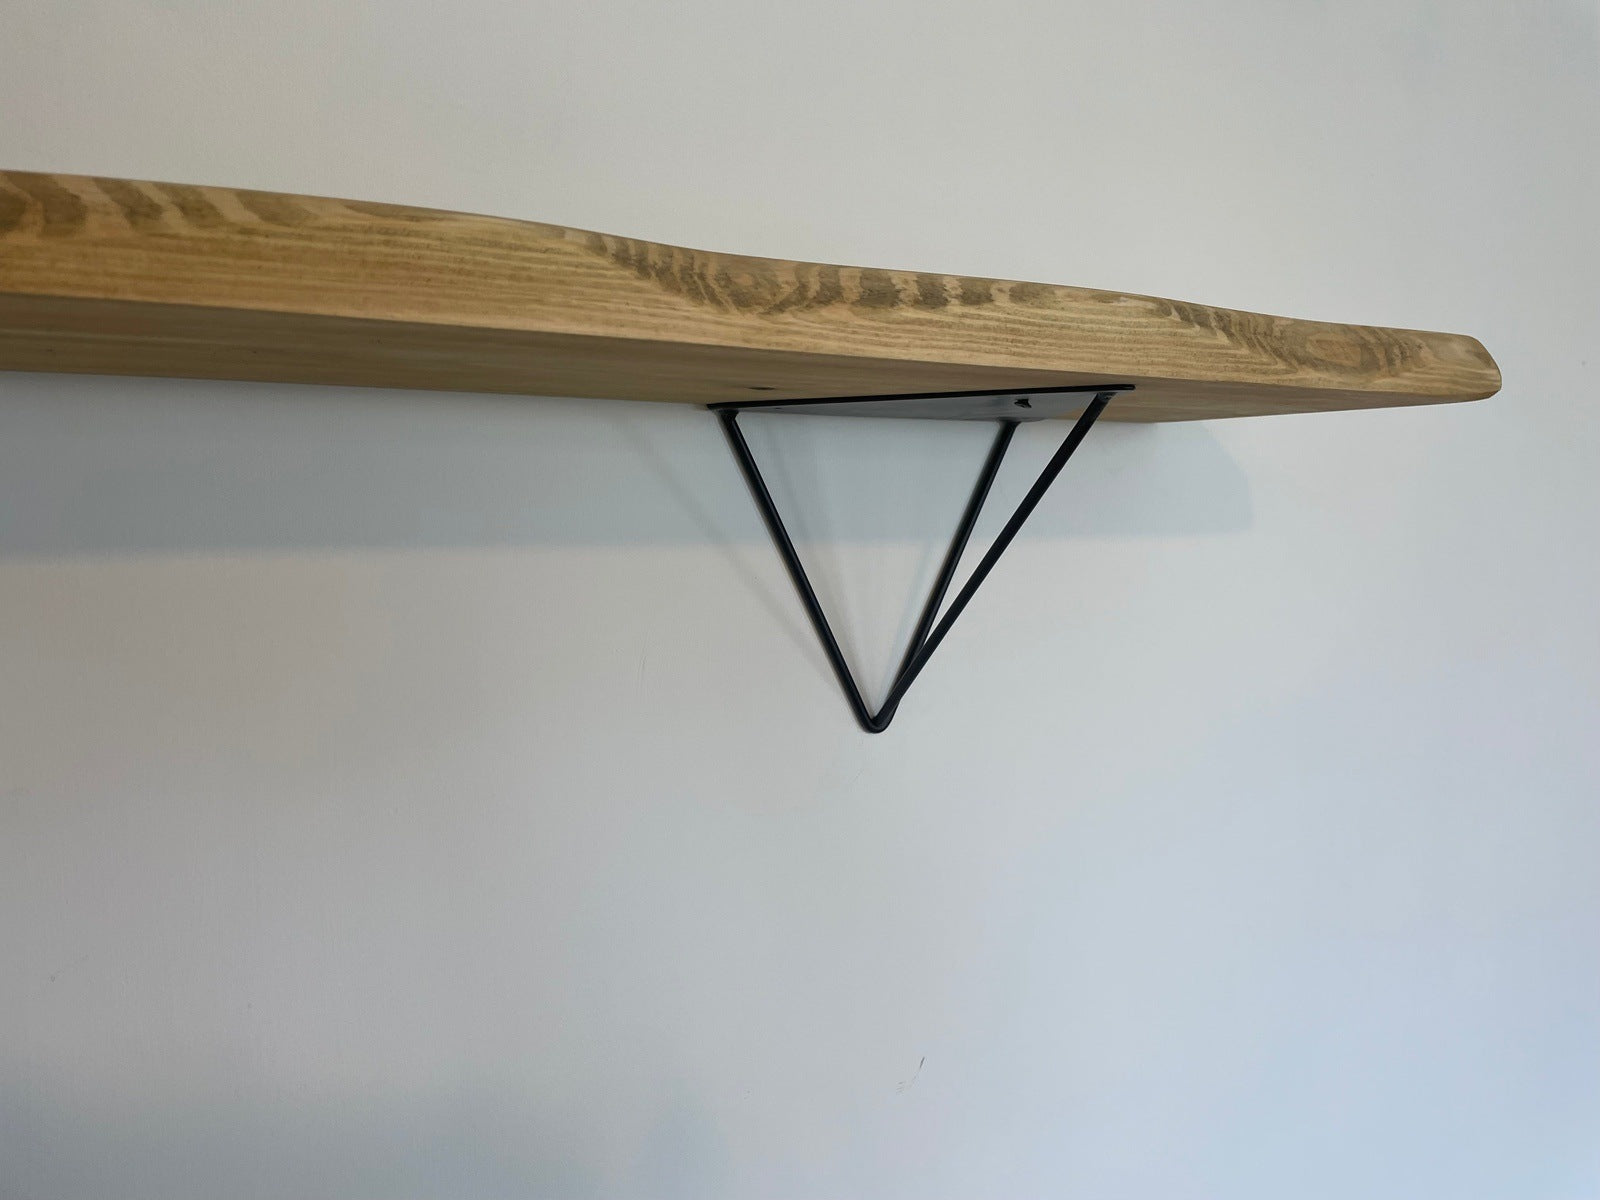 Live Edge Shelf with black prism style brackets, handmade to order, 5 wood finishes.